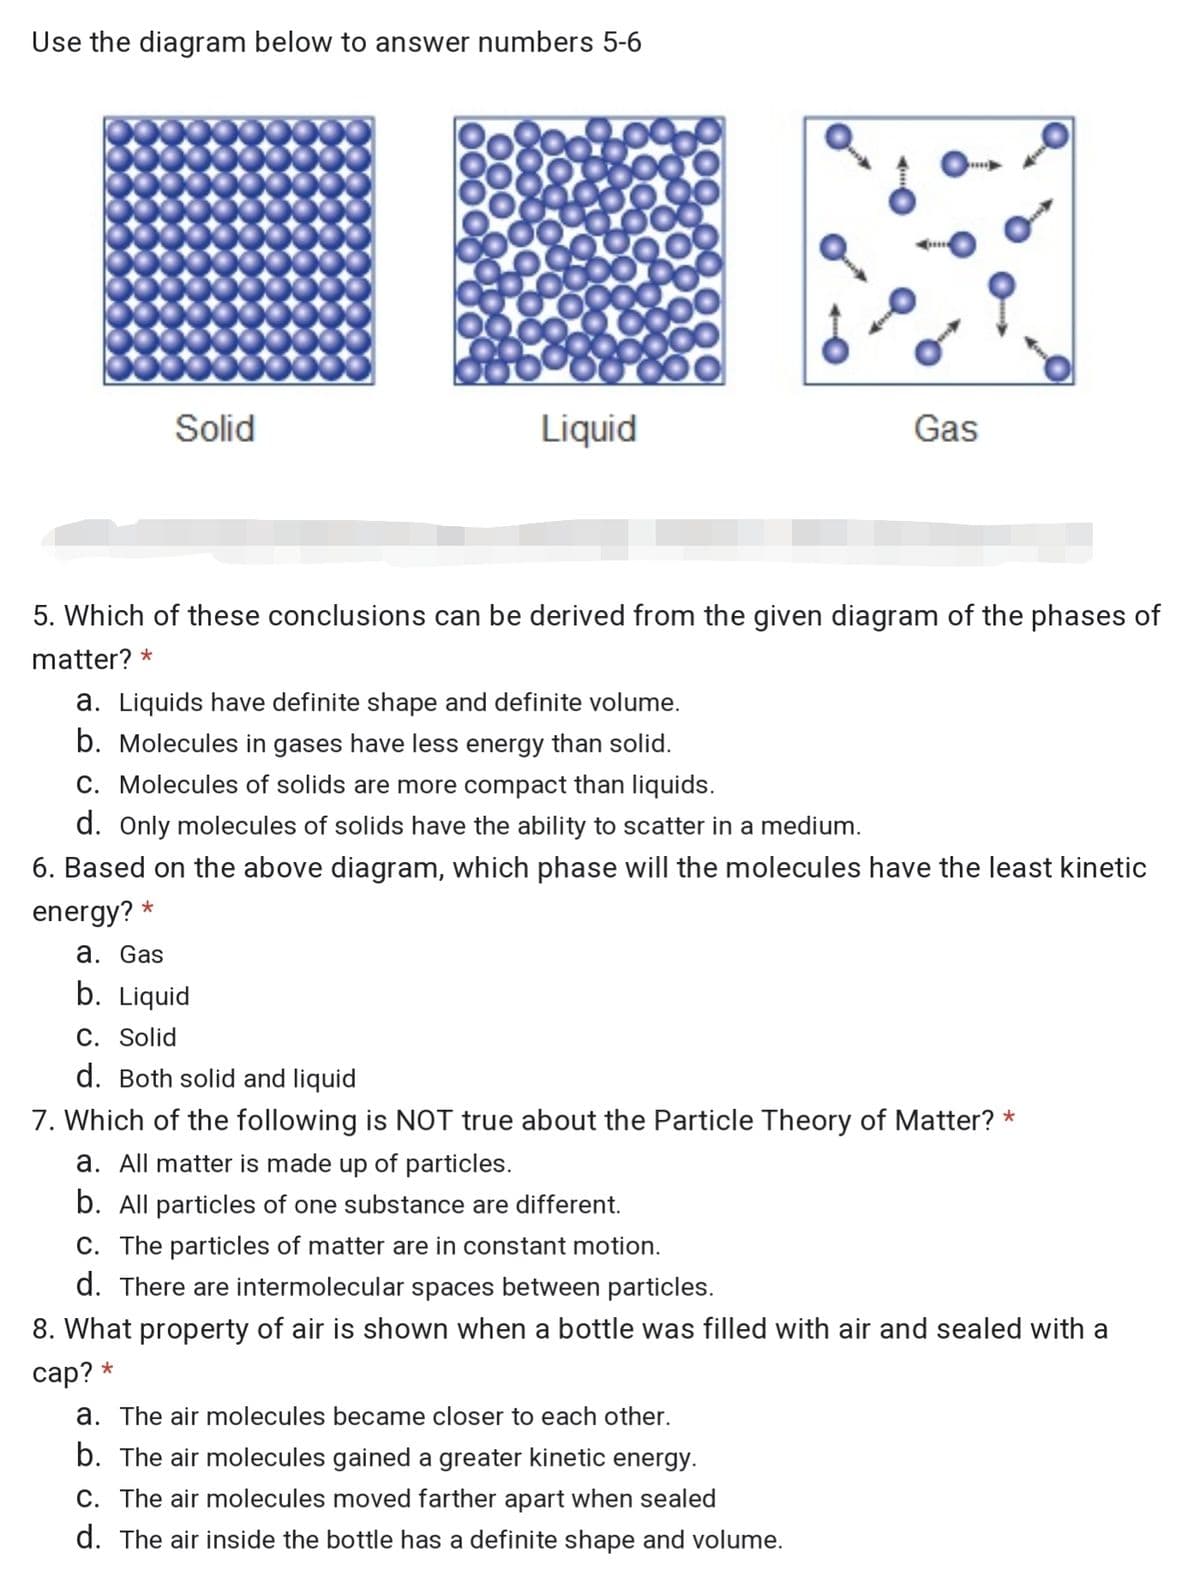 Use the diagram below to answer numbers 5-6
Solid
Liquid
Gas
5. Which of these conclusions can be derived from the given diagram of the phases of
matter? *
a. Liquids have definite shape and definite volume.
b. Molecules in gases have less energy than solid.
C. Molecules of solids are more compact than liquids.
d. Only molecules of solids have the ability to scatter in a medium.
6. Based on the above diagram, which phase will the molecules have the least kinetic
energy? *
a. Gas
b. Liquid
C. Solid
d. Both solid and liquid
7. Which of the following is NOT true about the Particle Theory of Matter? *
a. All matter is made up of particles.
b. All particles of one substance are different.
C. The particles of matter are in constant motion.
d. There are intermolecular spaces between particles.
8. What property of air is shown when a bottle was filled with air and sealed with a
саp? *
a. The air molecules became closer to each other.
b. The air molecules gained a greater kinetic energy.
C. The air molecules moved farther apart when sealed
d. The air inside the bottle has a definite shape and volume.
